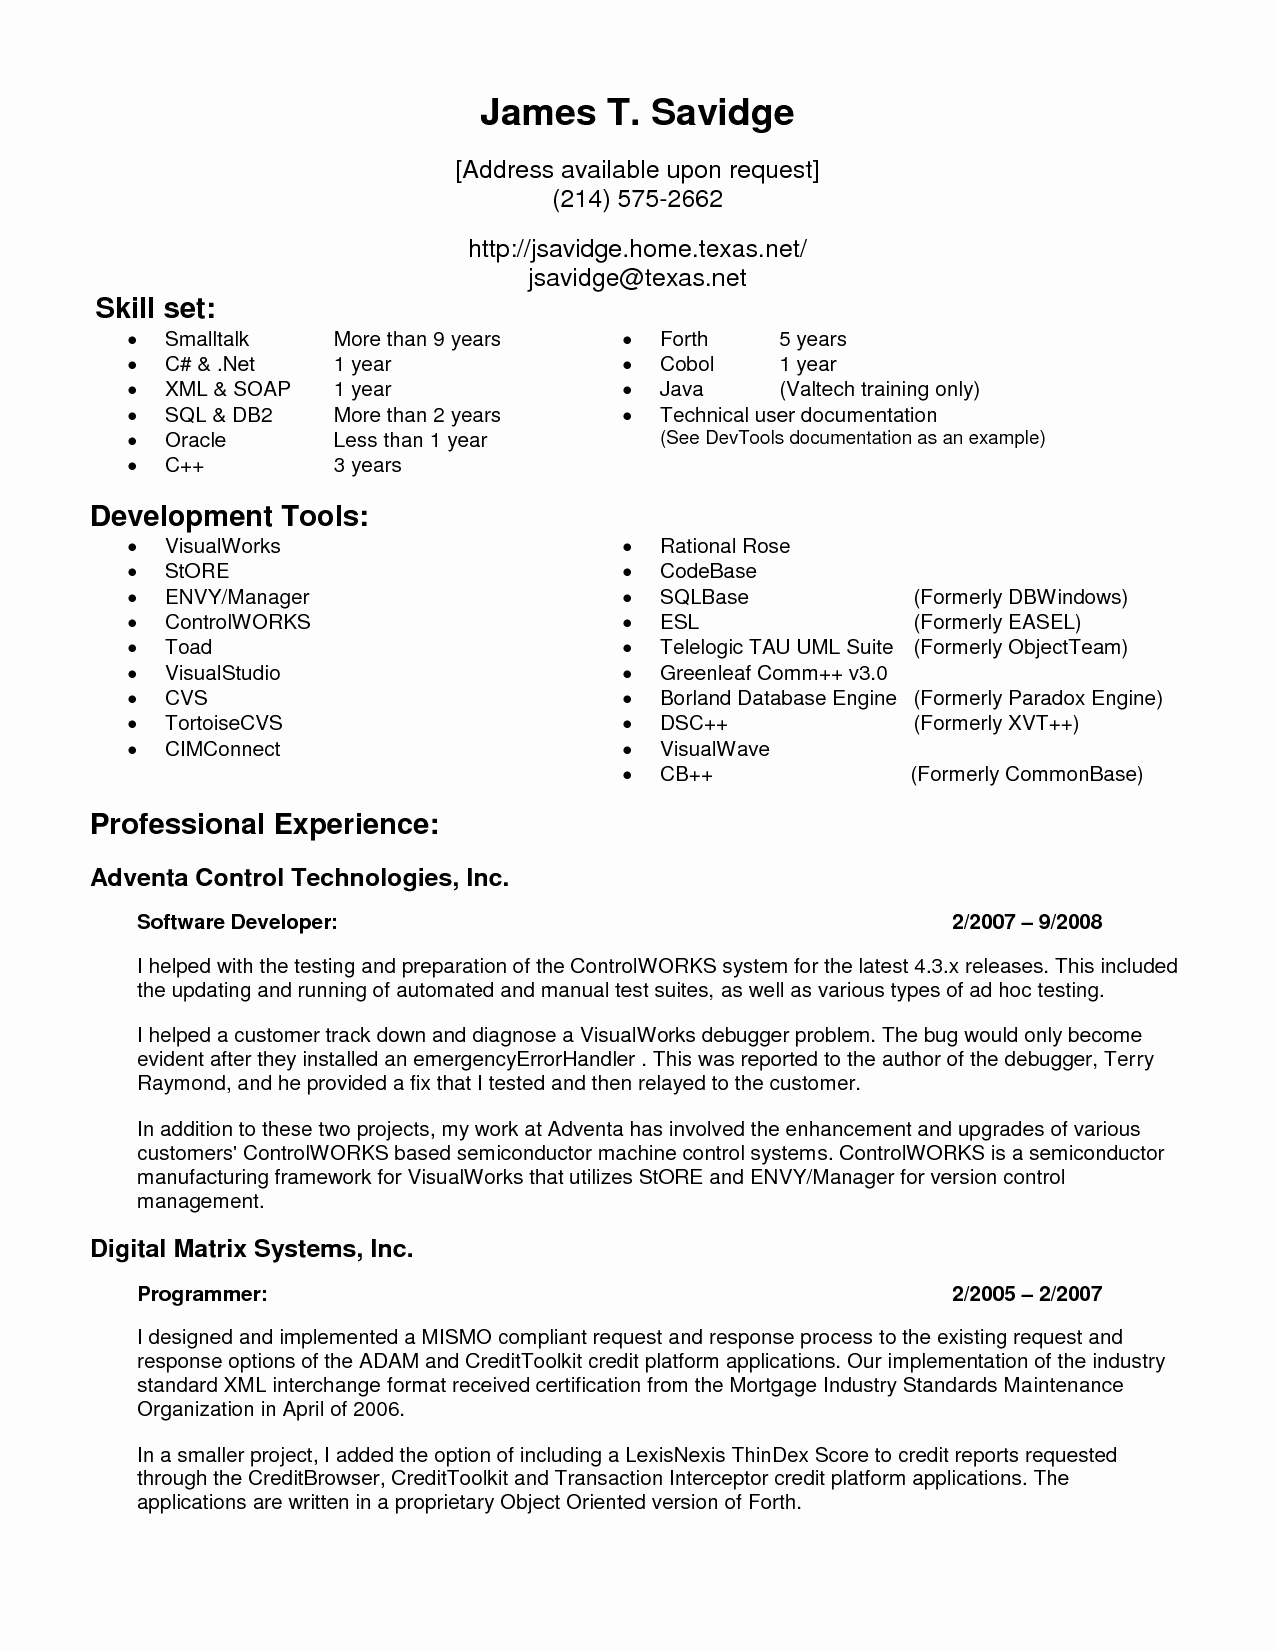 9 Years Experience Resume Format 